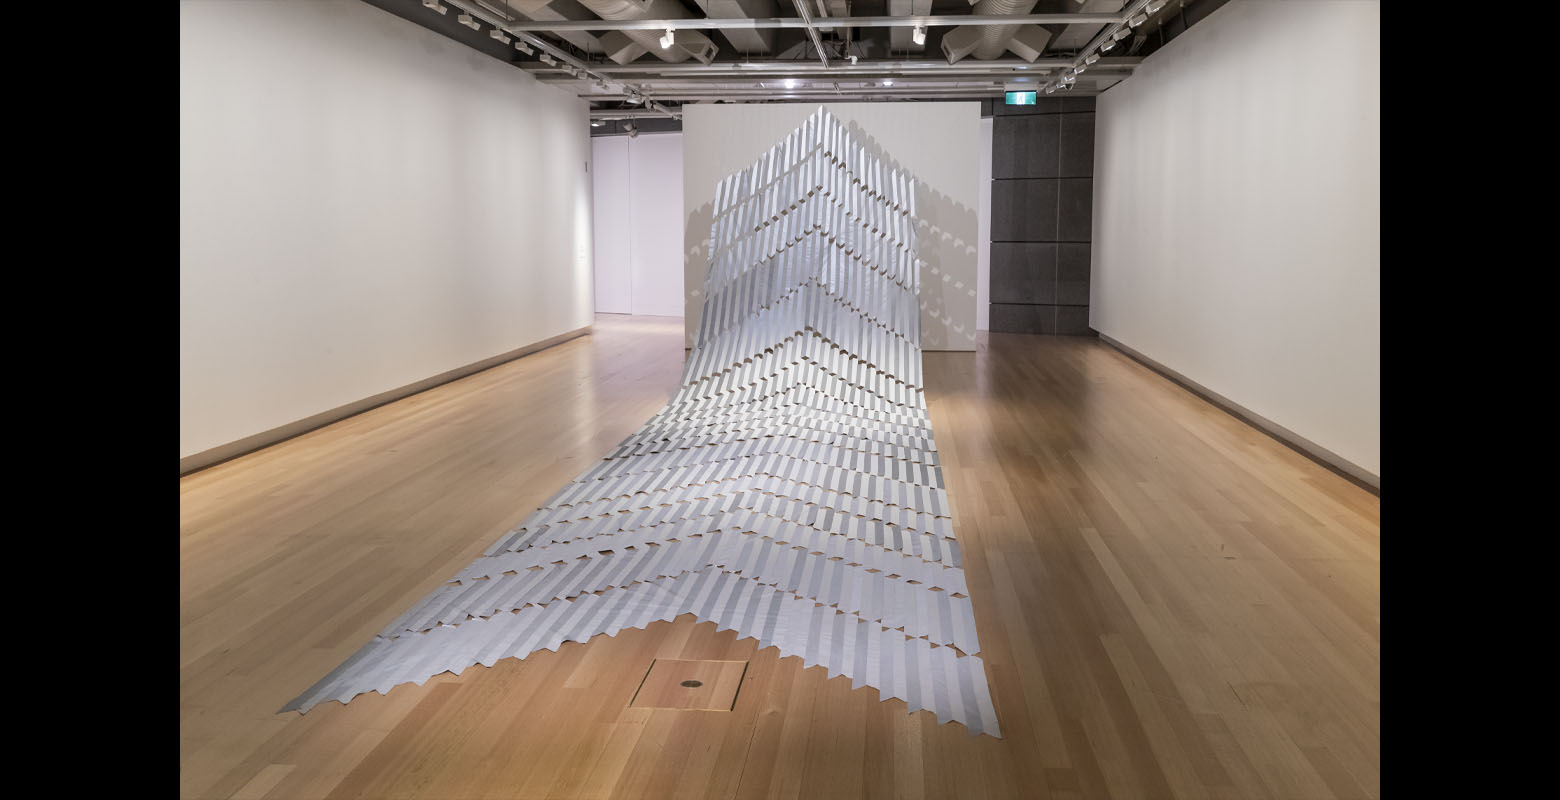 Pieces of hi-vis tape are woven together to create a large arrow-shaped artwork point from the floor up to the ceiling.